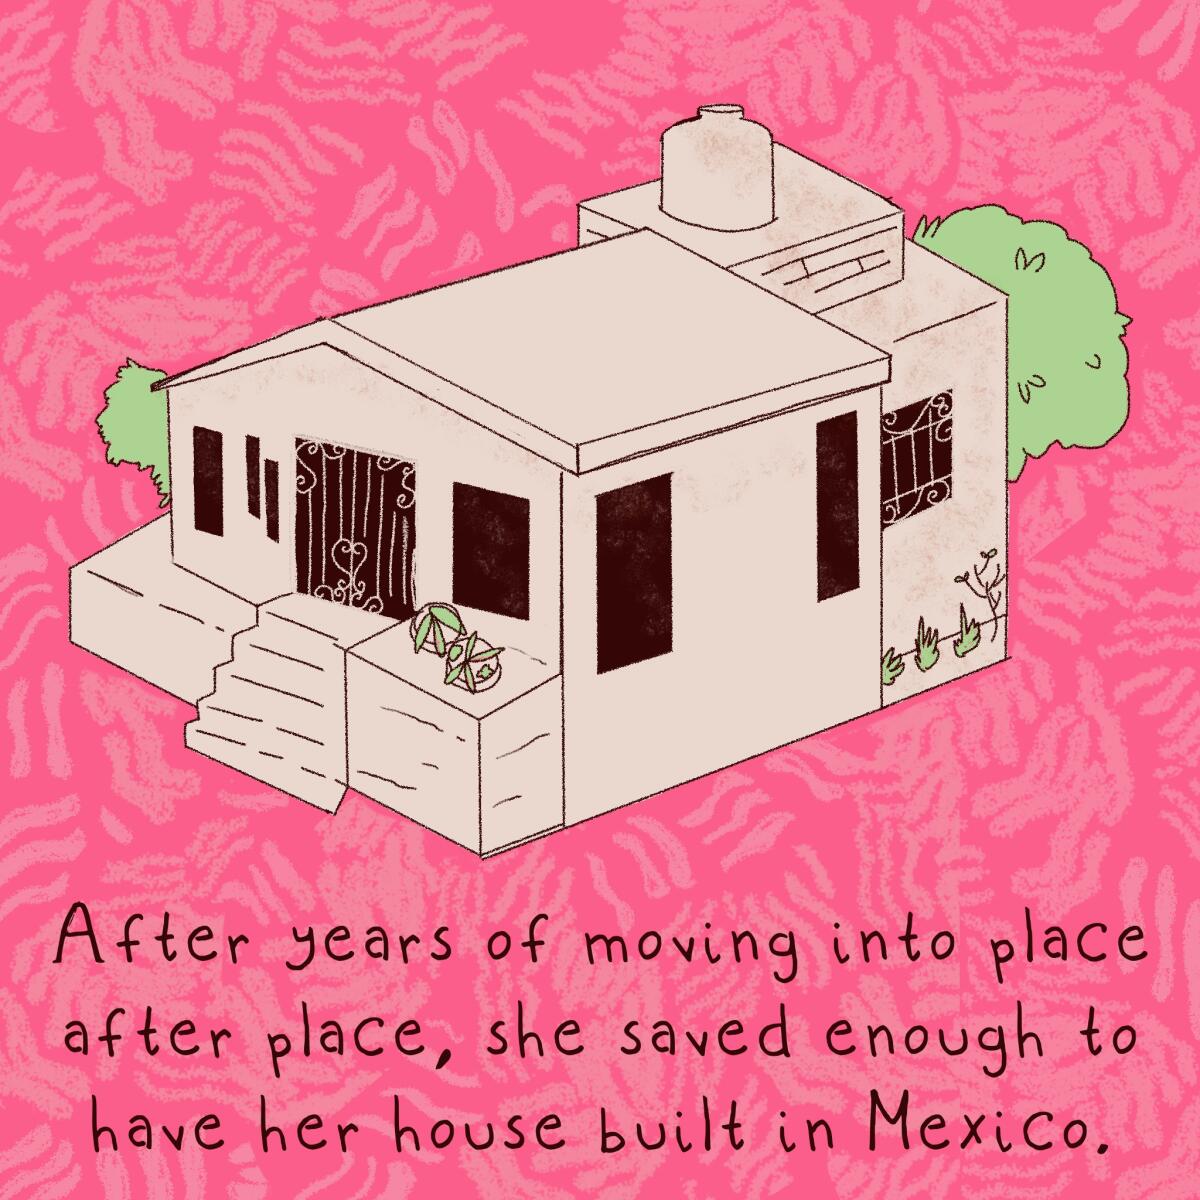 After years of moving into place after place, she save enough to have her house built in Mexico 